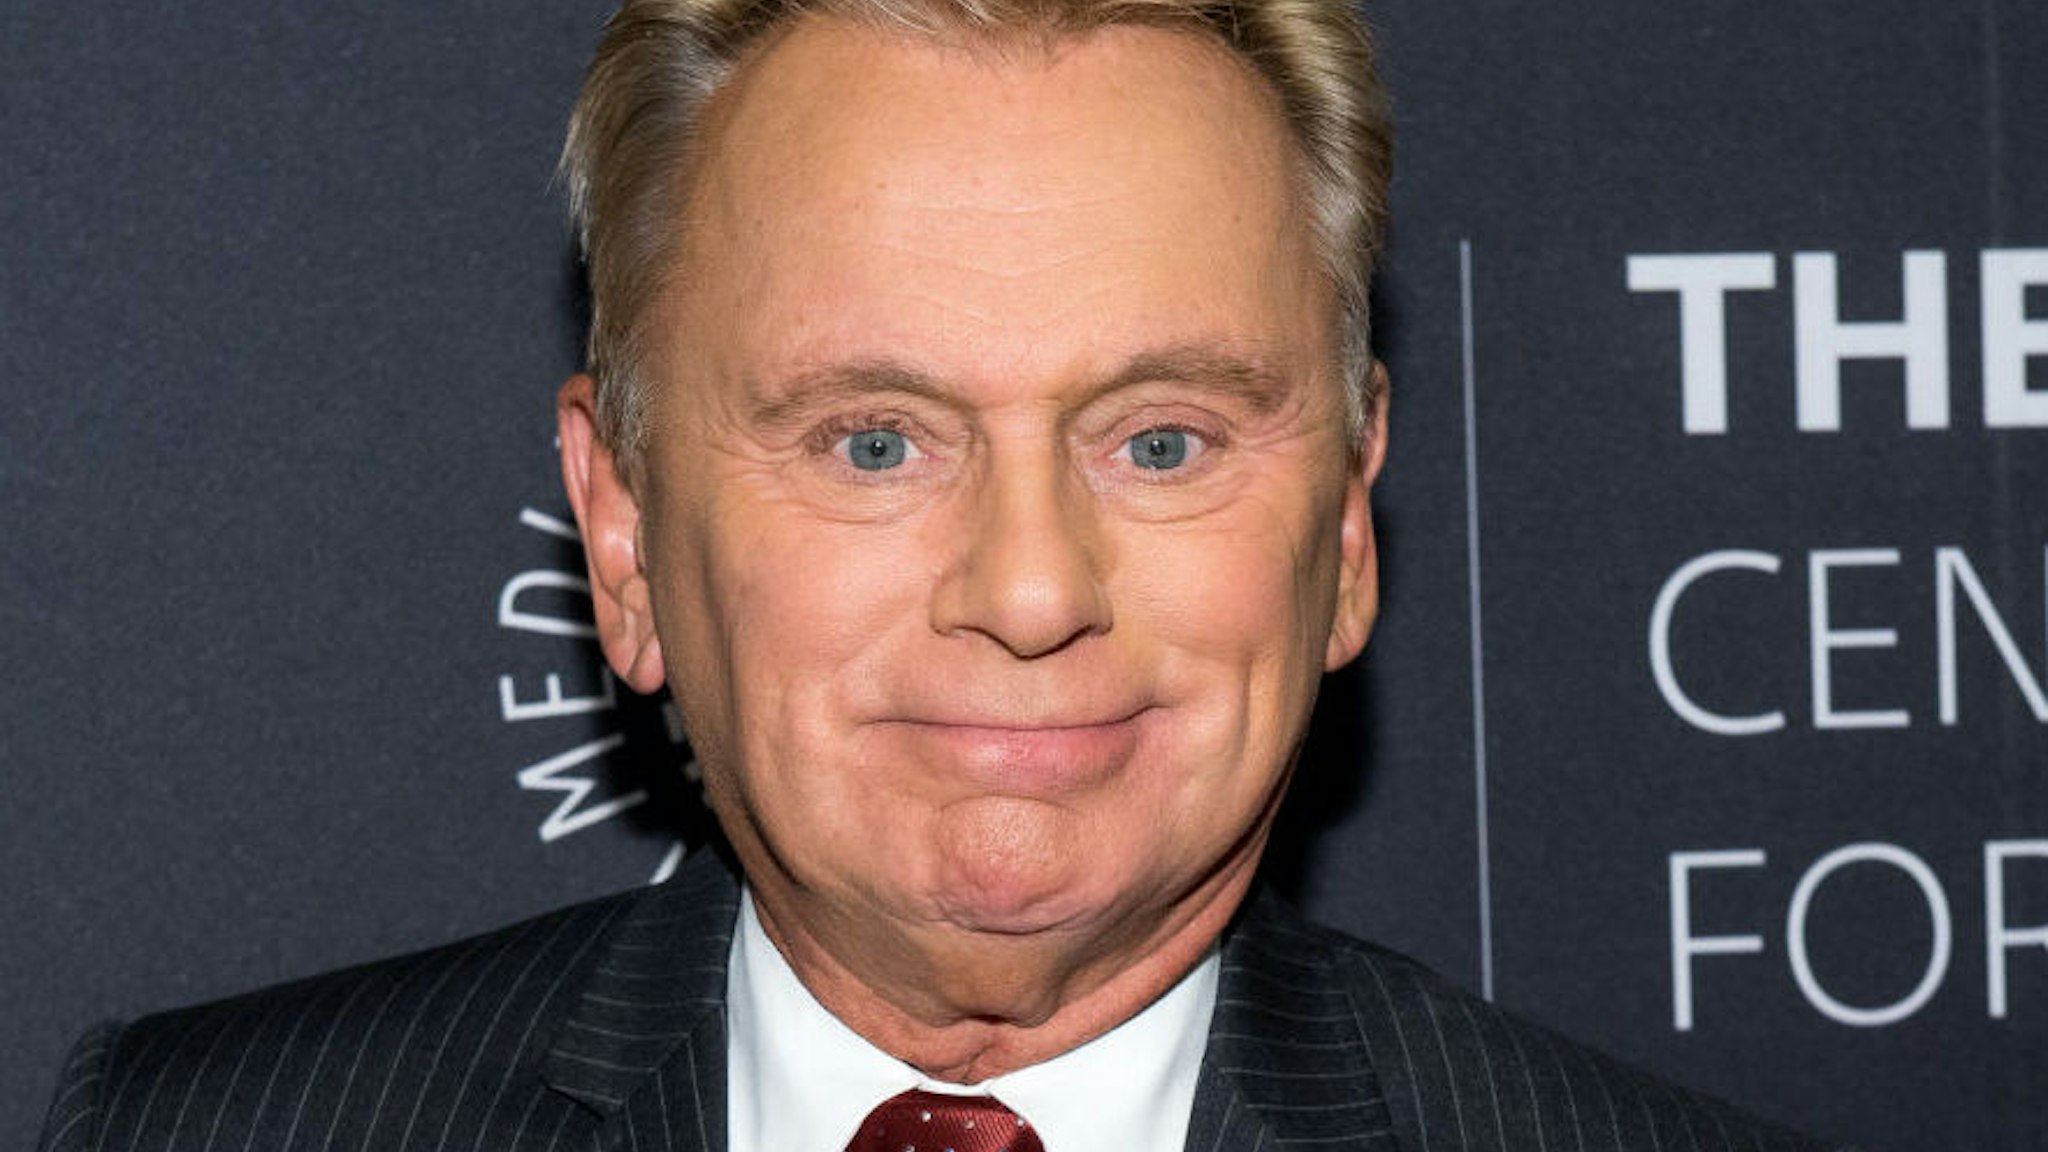 NEW YORK, NY - NOVEMBER 15: Pat Sajak attends The Paley Center For Media Presents: Wheel Of Fortune: 35 Years As America's Game at The Paley Center for Media on November 15, 2017 in New York City.